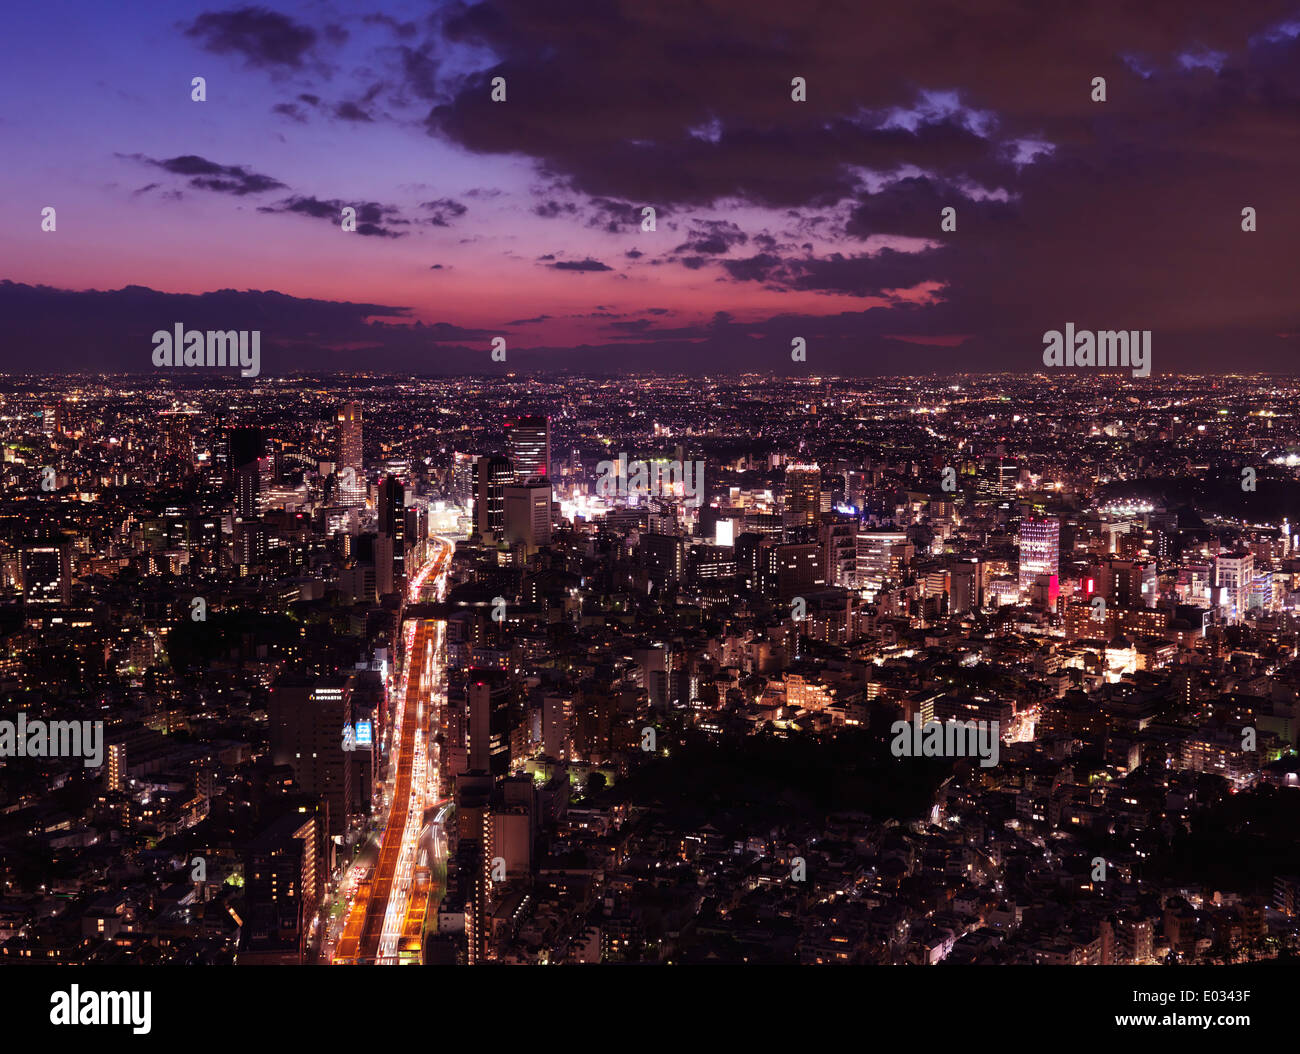 Dramatic twilight scenery of Tokyo city landscape lit with brightly lit highway, aerial view. Shibuya, Tokyo, Japan. Stock Photo